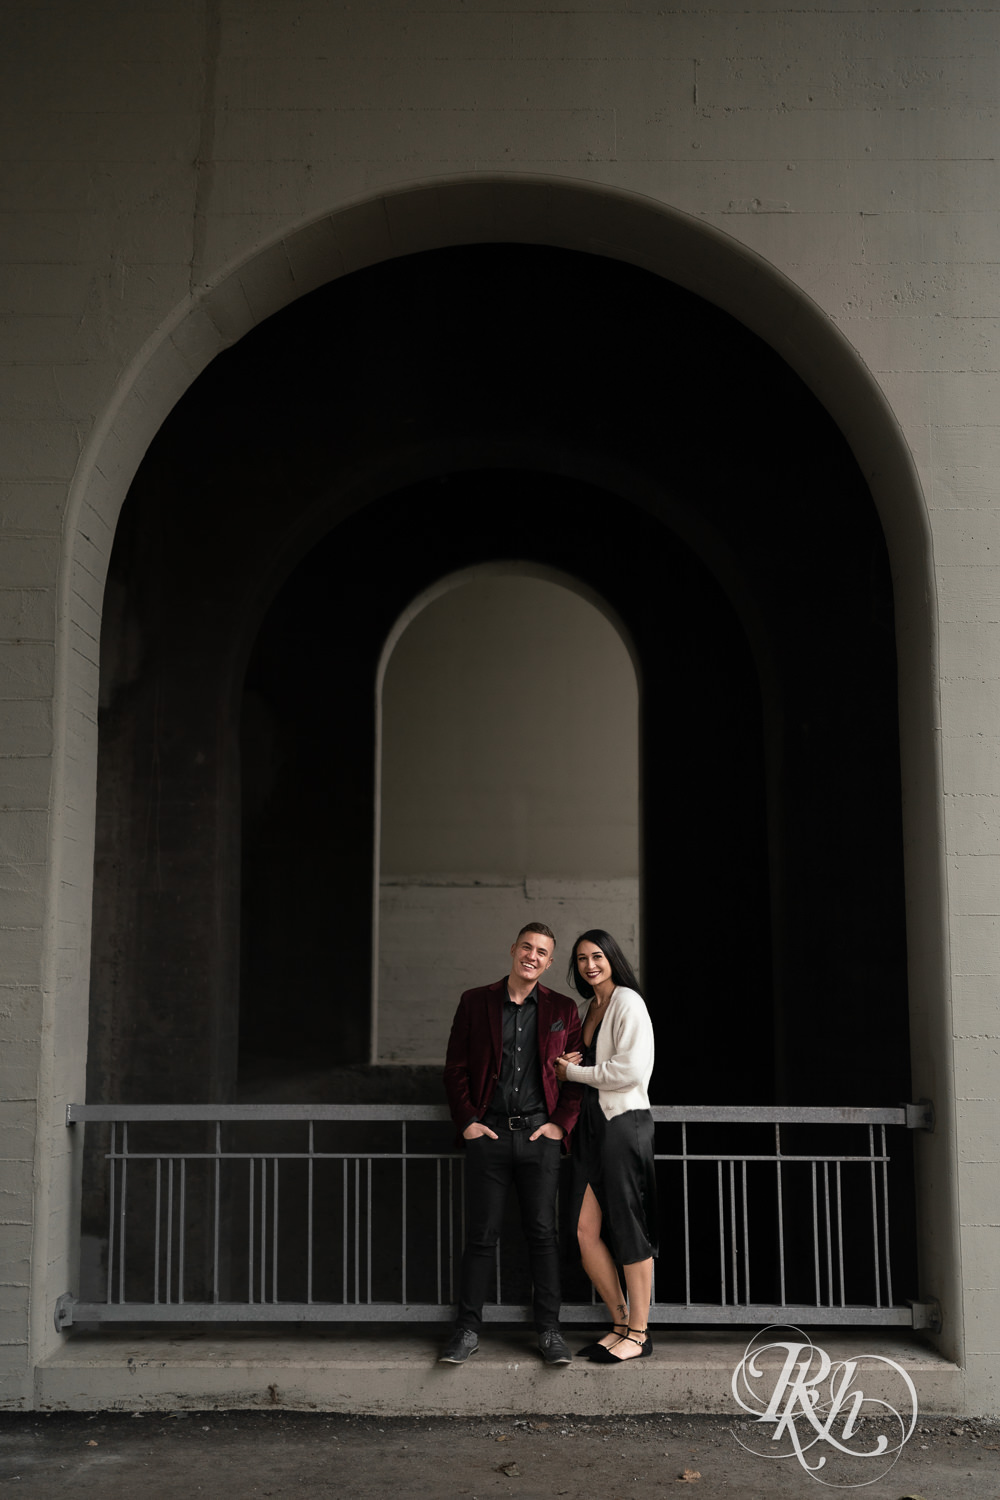 Man in black clothes and burgundy jacket and woman in black dress smile during engagement photography in Minneapolis, Minnesota.